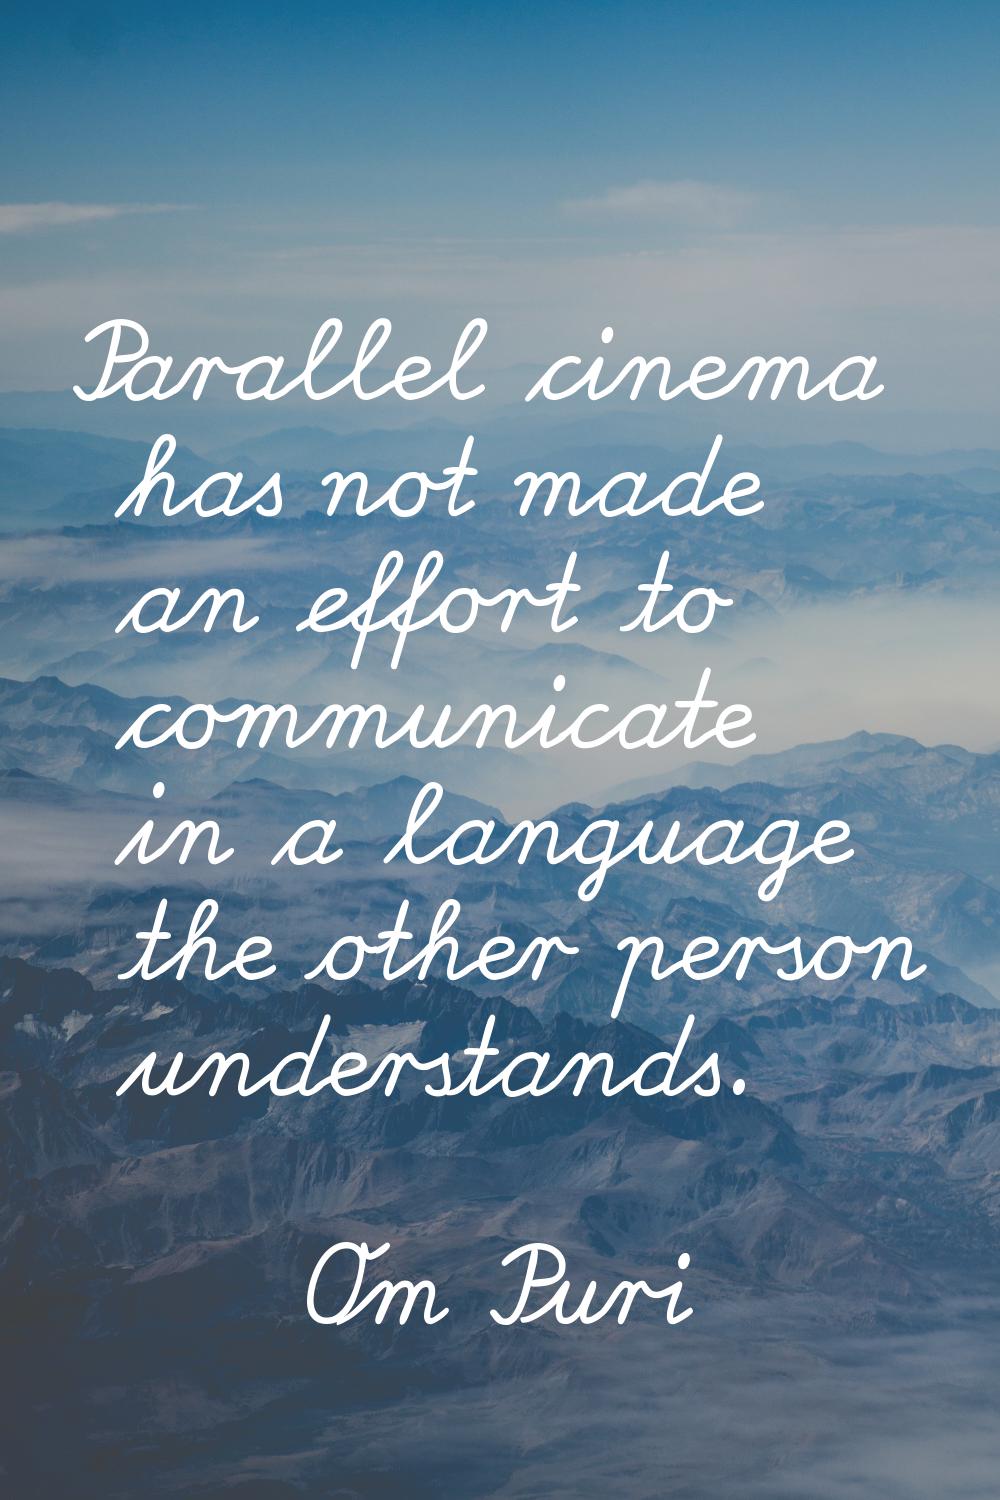 Parallel cinema has not made an effort to communicate in a language the other person understands.